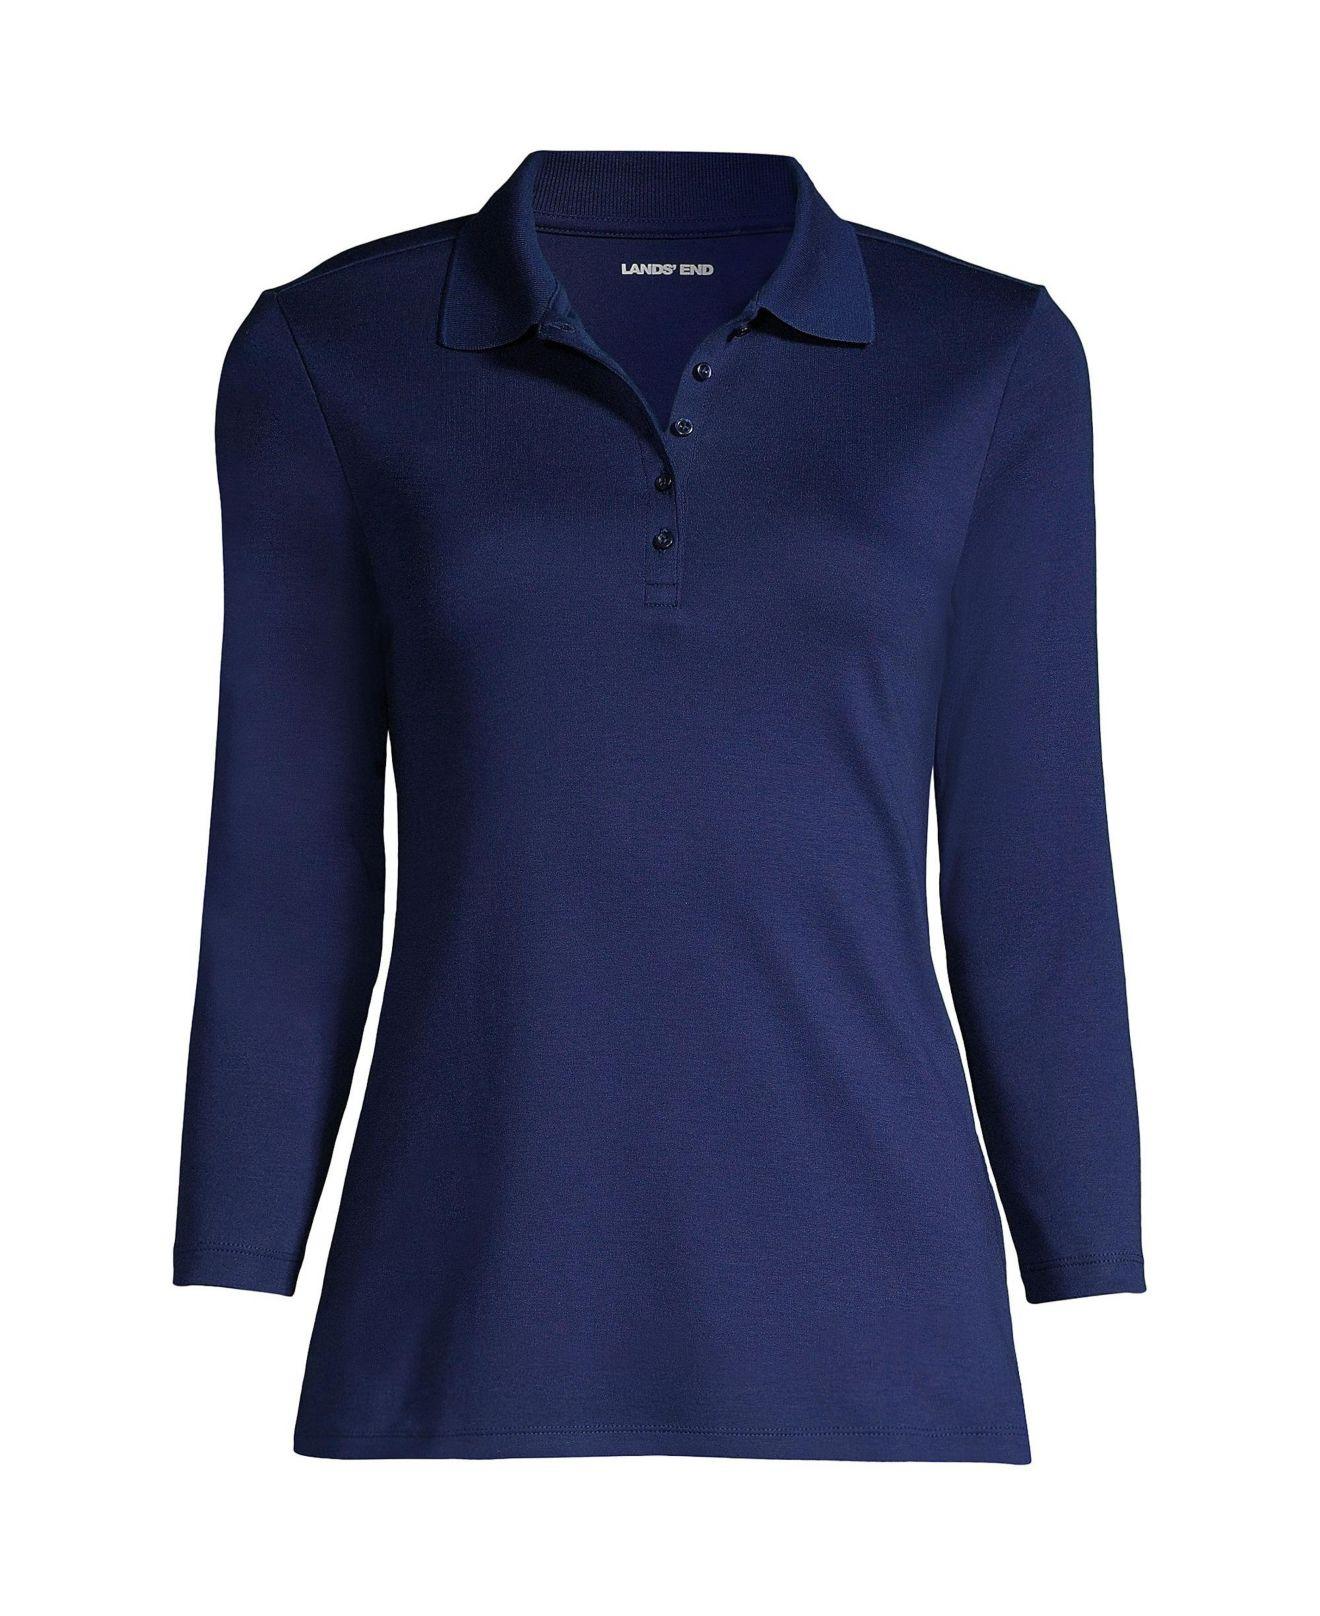 Lands' End Supima Cotton Three Quarters Sleeve Polo Shirt in Blue Lyst